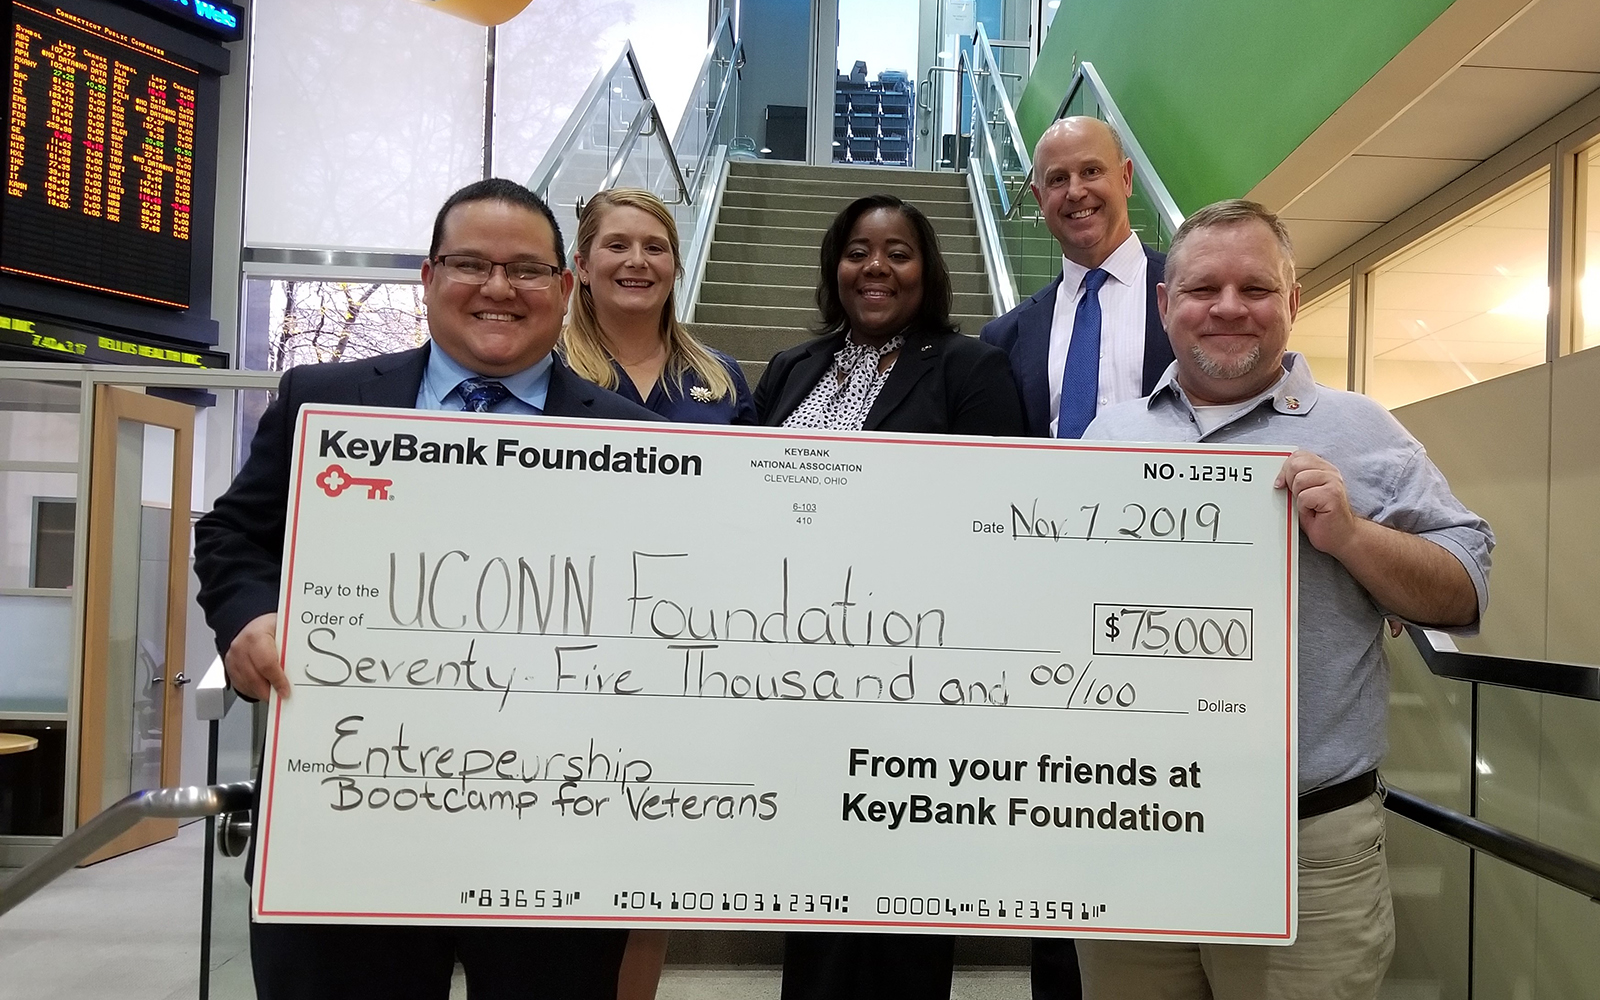 KeyBank has presented a $75,000 grant to the UConn School of Business’ Entrepreneurship Bootcamp for Veterans, which helps U.S. military veterans become small business owners. Pictured from left to right are UConn EBV program graduates Jorge and Jessica Rodriguez, KeyBank Corporate Responsibility Officer LaKisha Jordan, KeyBank Market President Jim Barger, and UConn  EBV Director Michael Zacchea. (Contributed Photo)